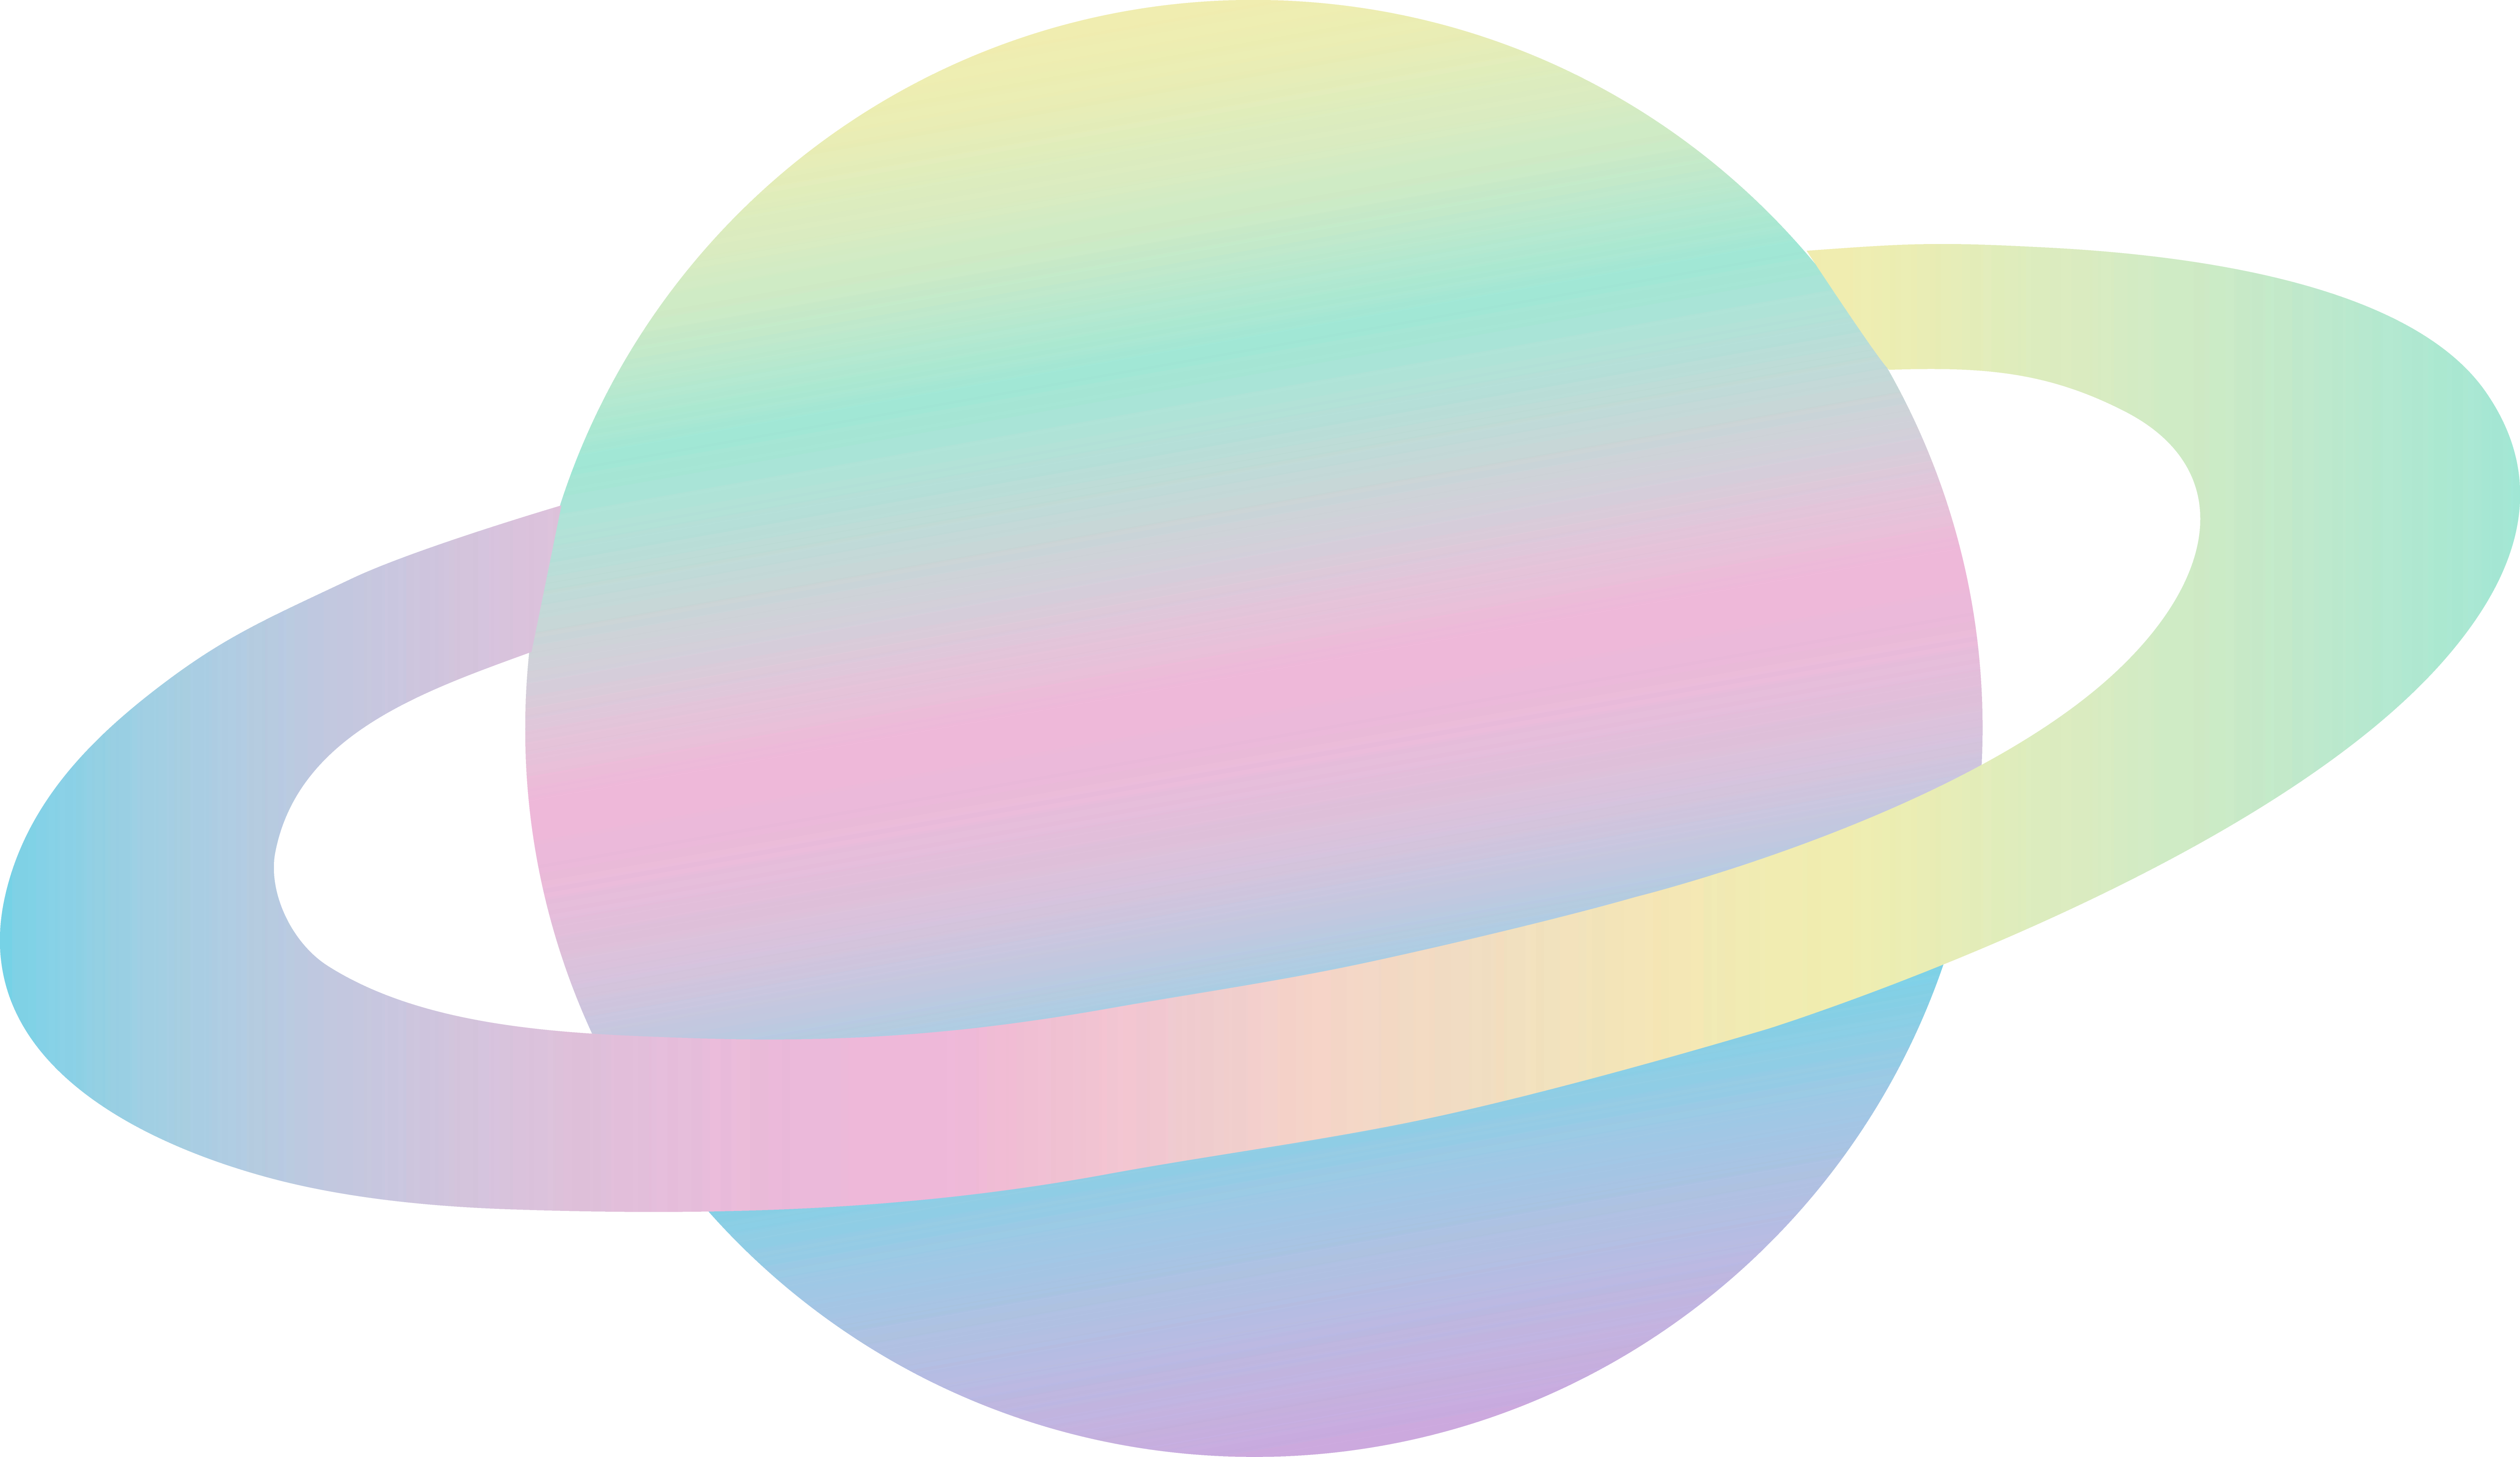 planet clipart planet earth